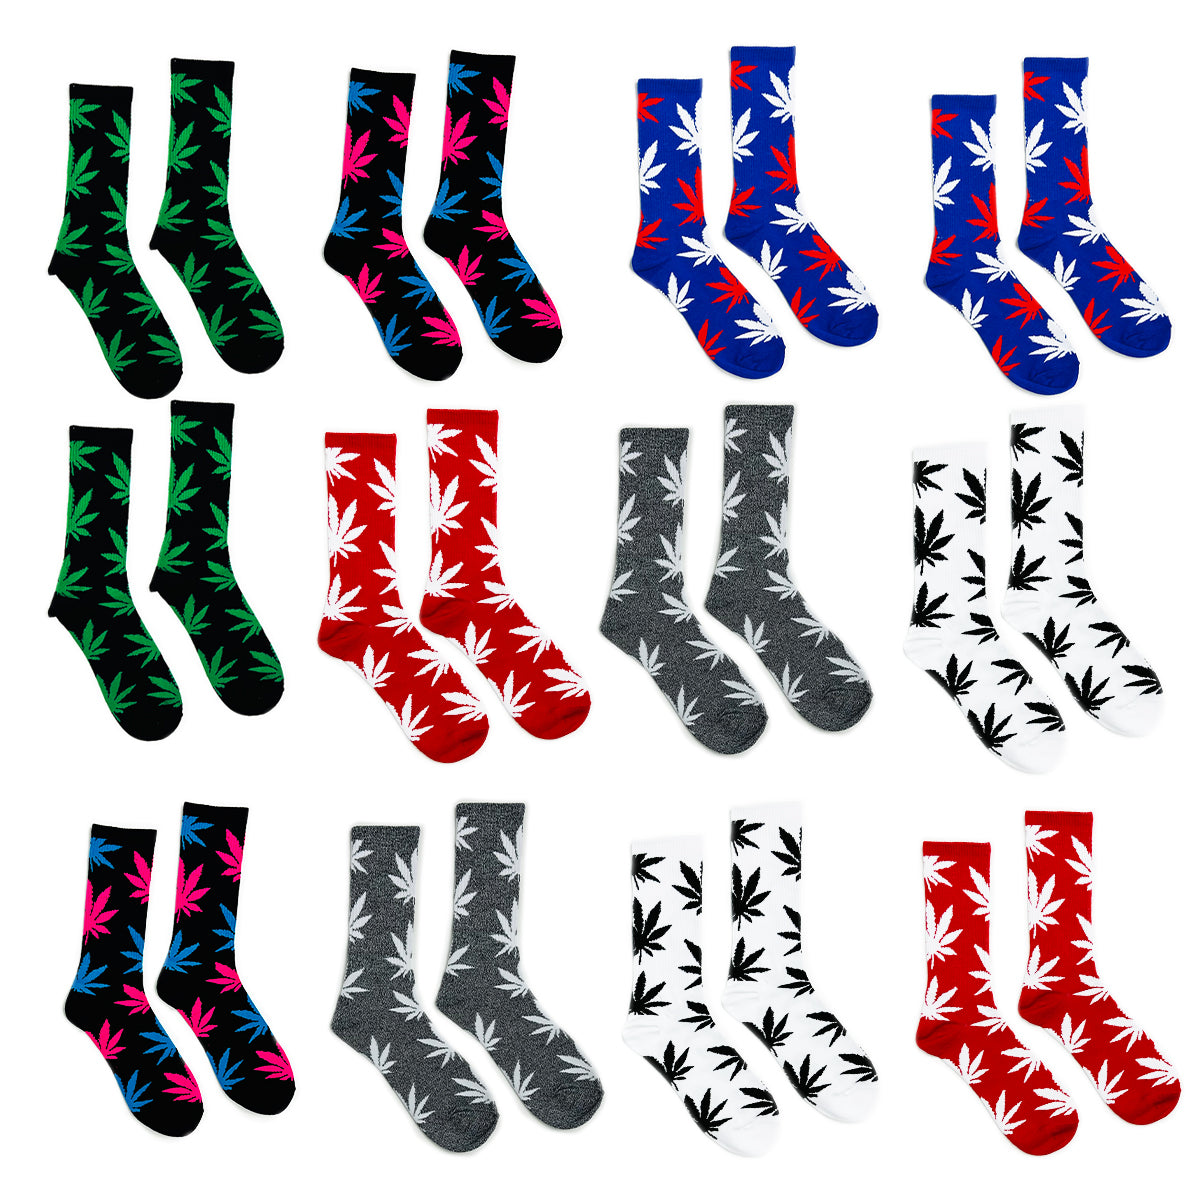 OG TREND Leaf Print Socks in Assorted Colors - One Pack Comes with 12 Pairs  Fits All